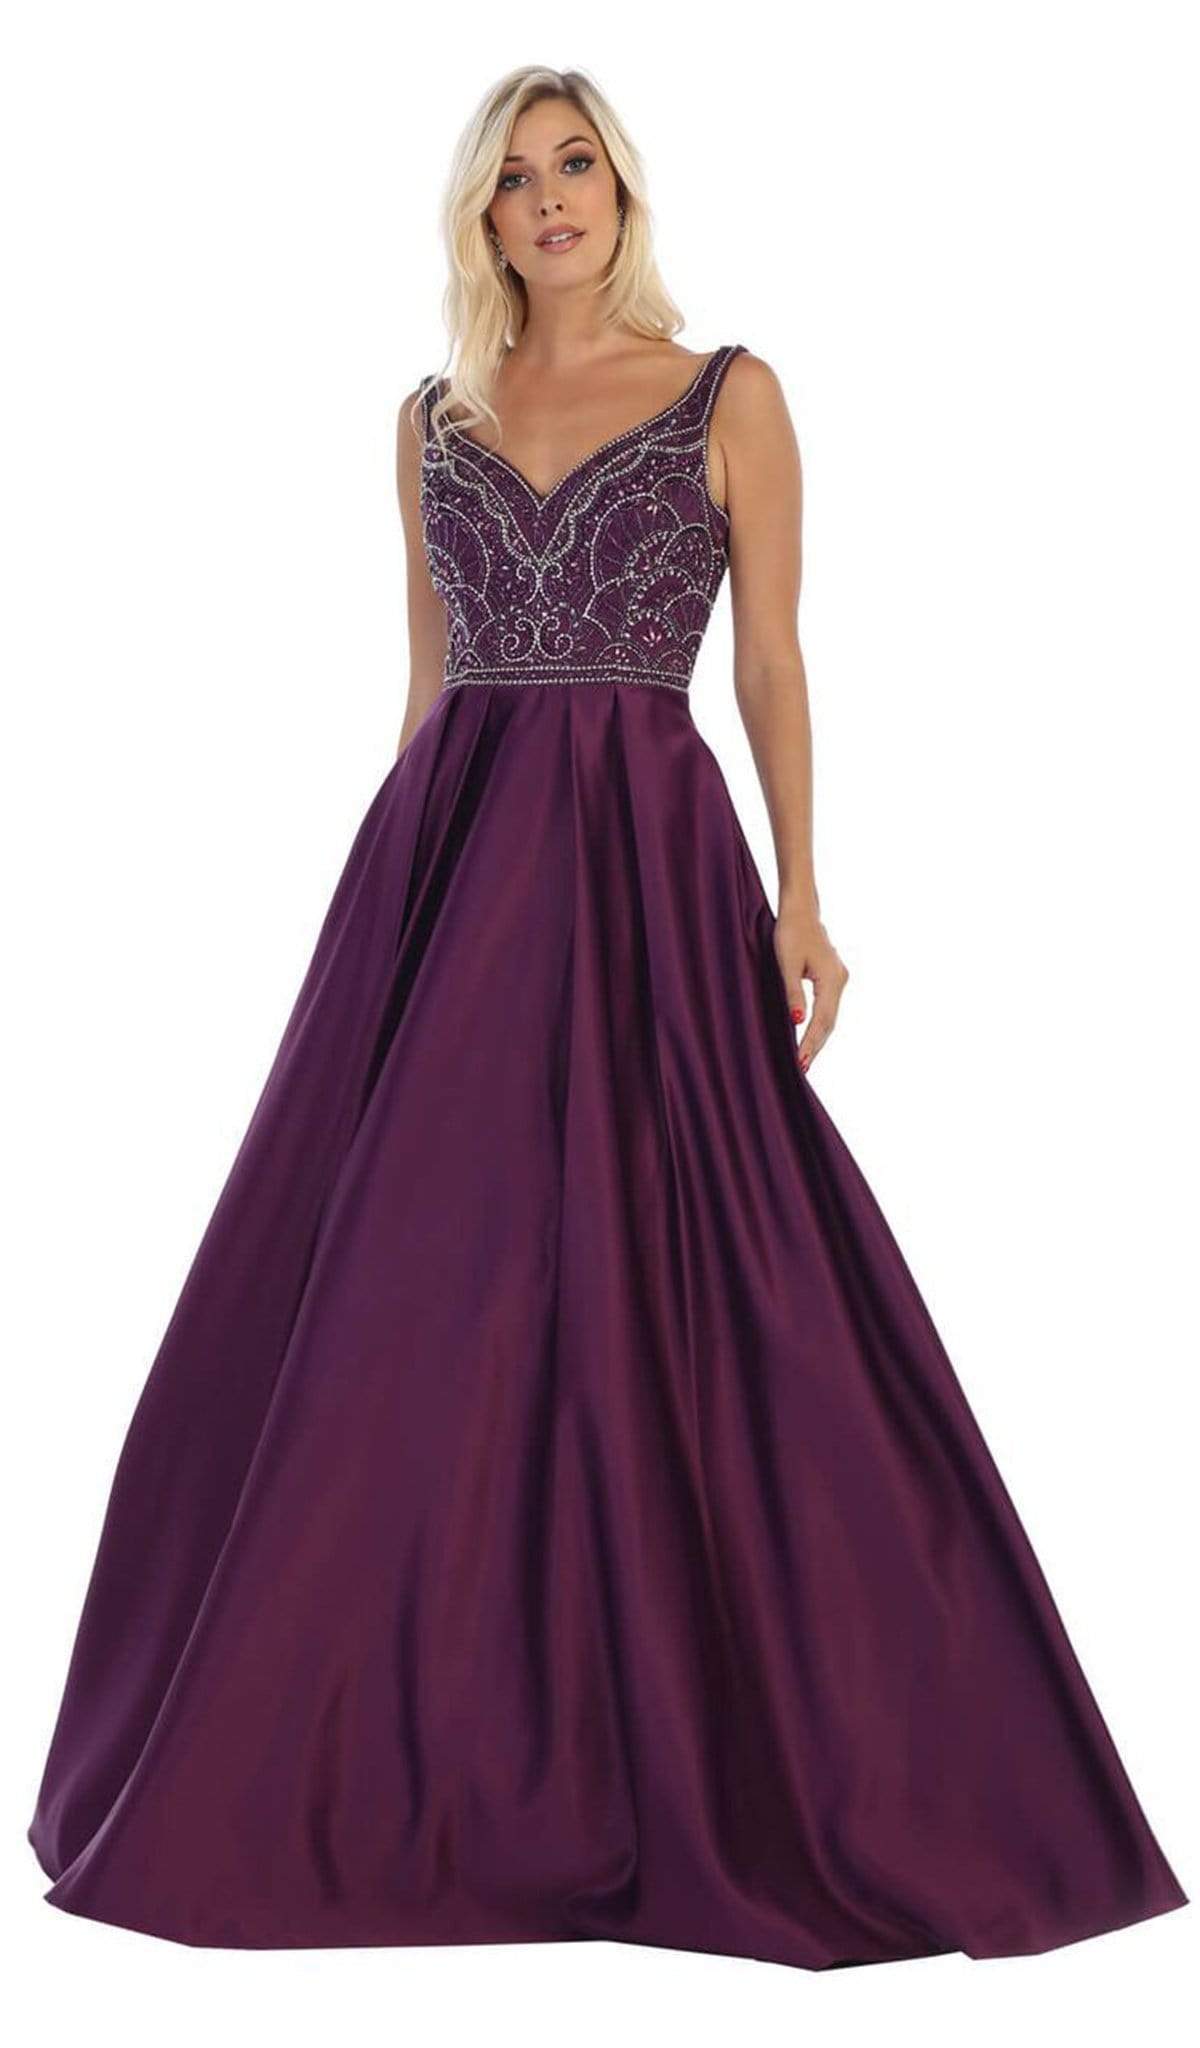 May Queen - MQ1632 Beaded V-Neck Pleated Ballgown Bridesmaid Dresses 4 / Eggplant